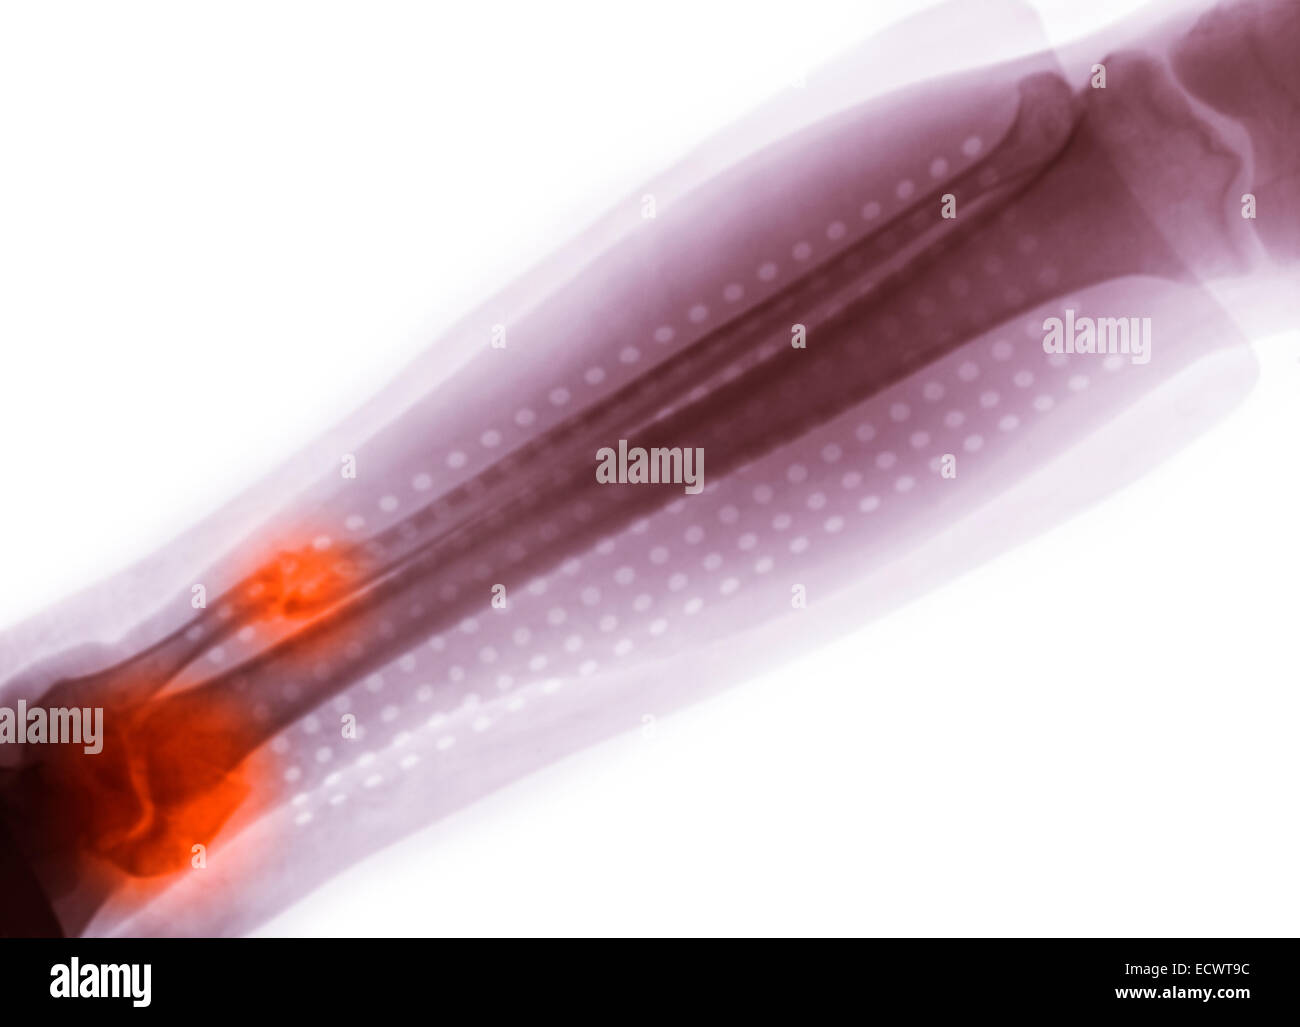 X-ray showing an ankle fracture. Stock Photo